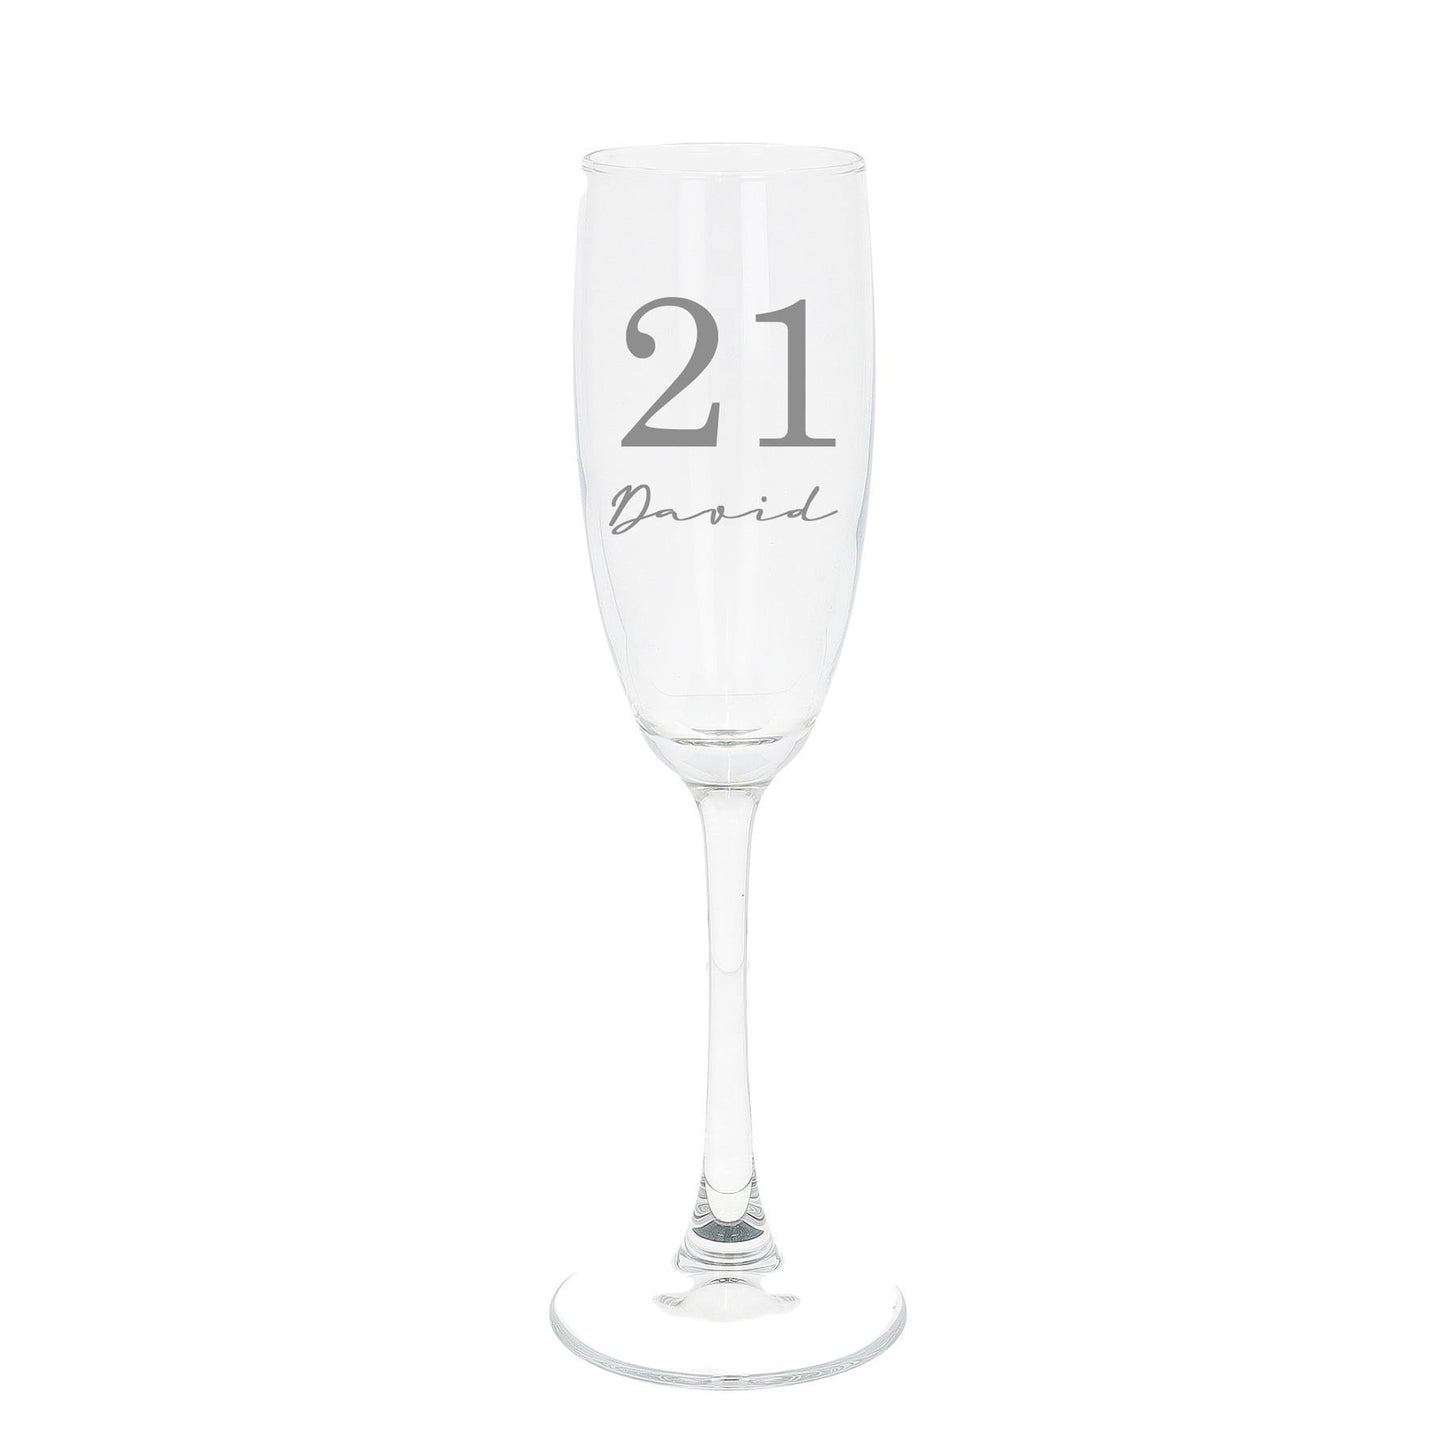 Personalised Engraved Big Birthday Champagne Flute Filled Occasion Glass  - Always Looking Good - Empty Glass  